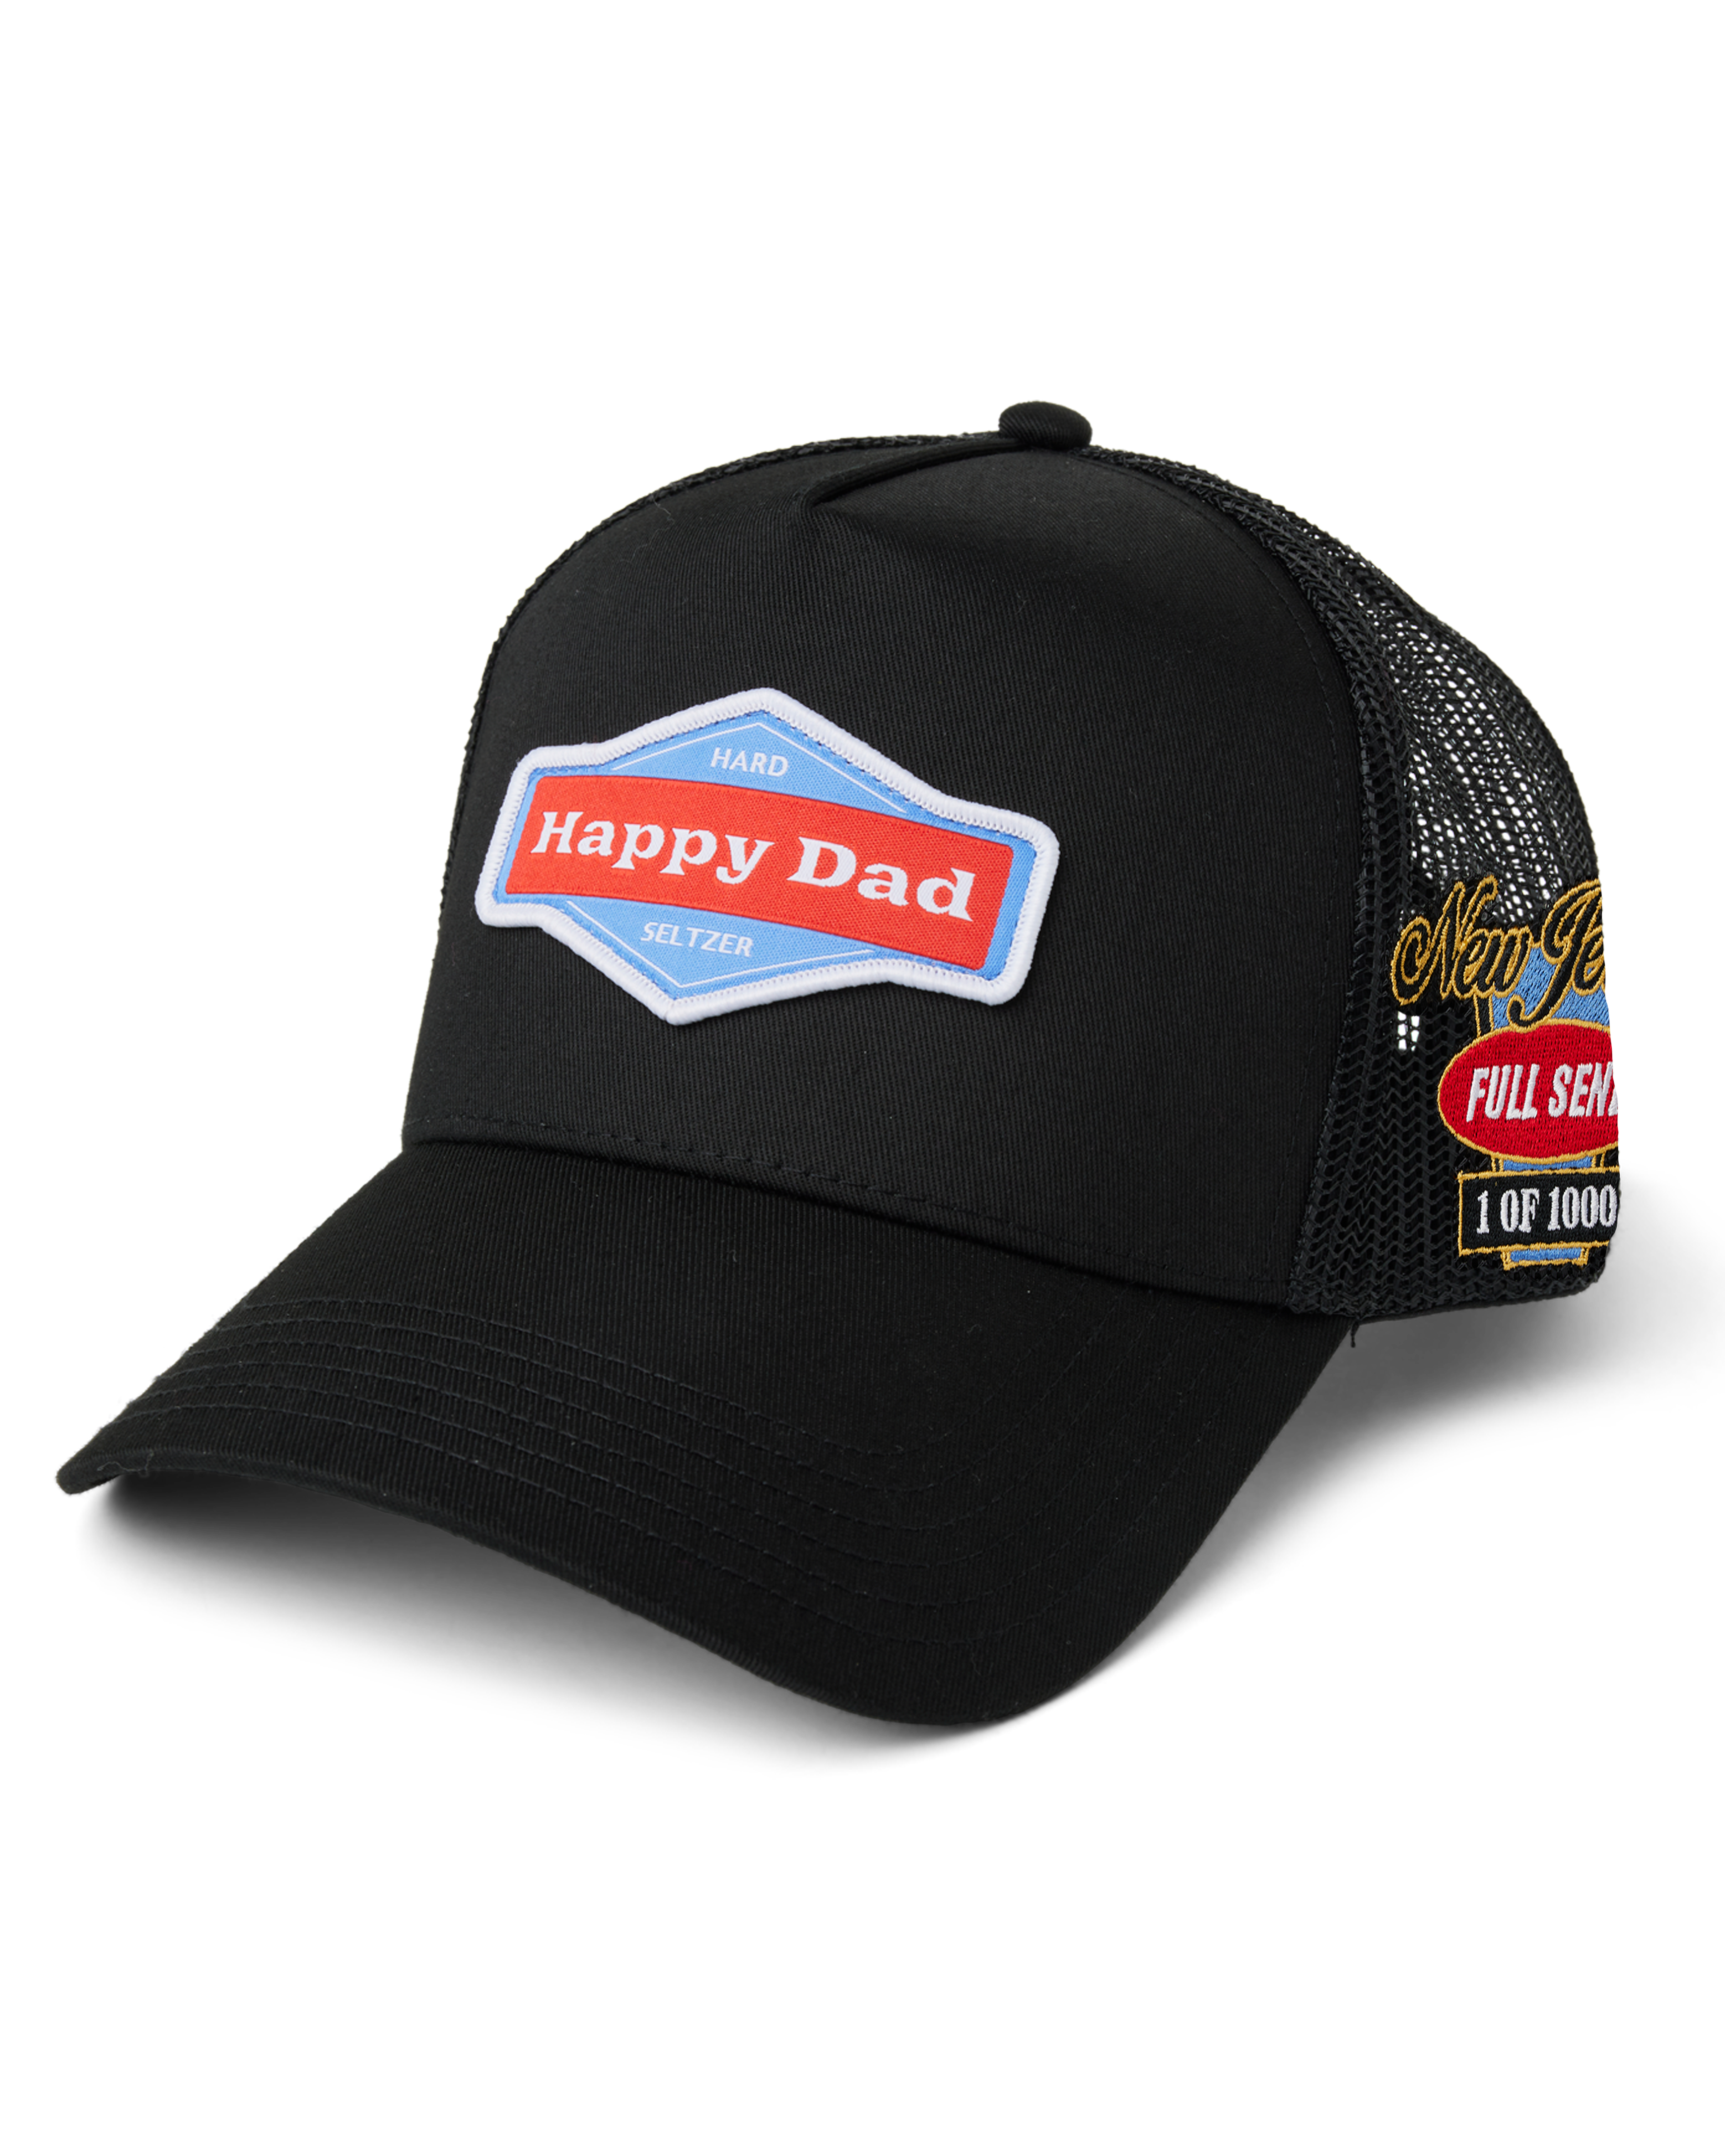 (Limited) New Jersey - Happy Dad State Trucker Hat 1 of 1000